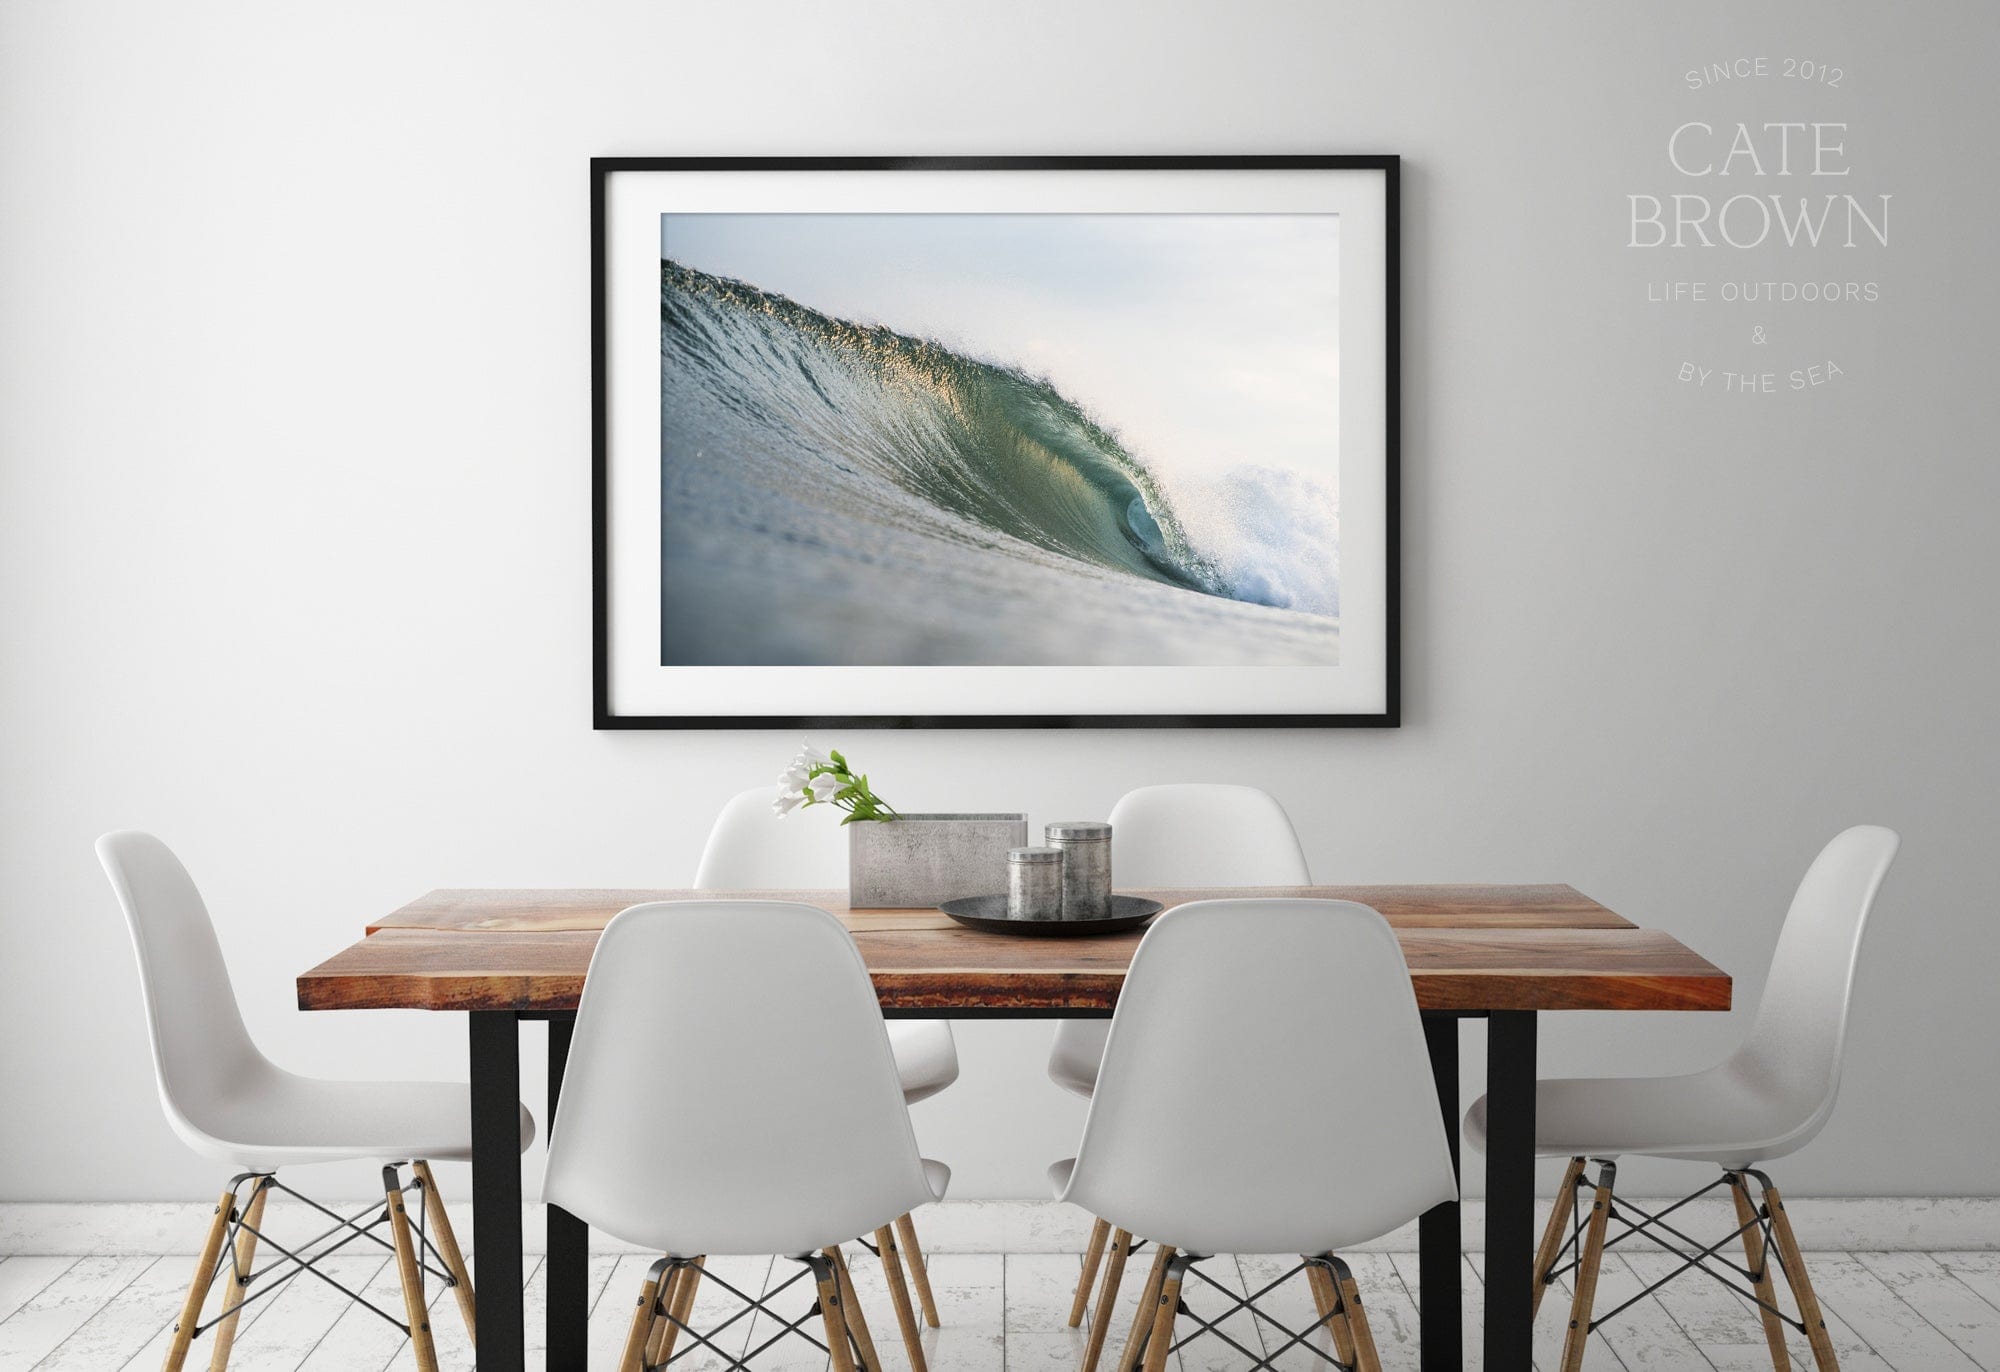 Cate Brown Photo Fine Art Print / 8"x12" / None (Print Only) Listen, alone beside the sea  //  Ocean Photography Made to Order Ocean Fine Art